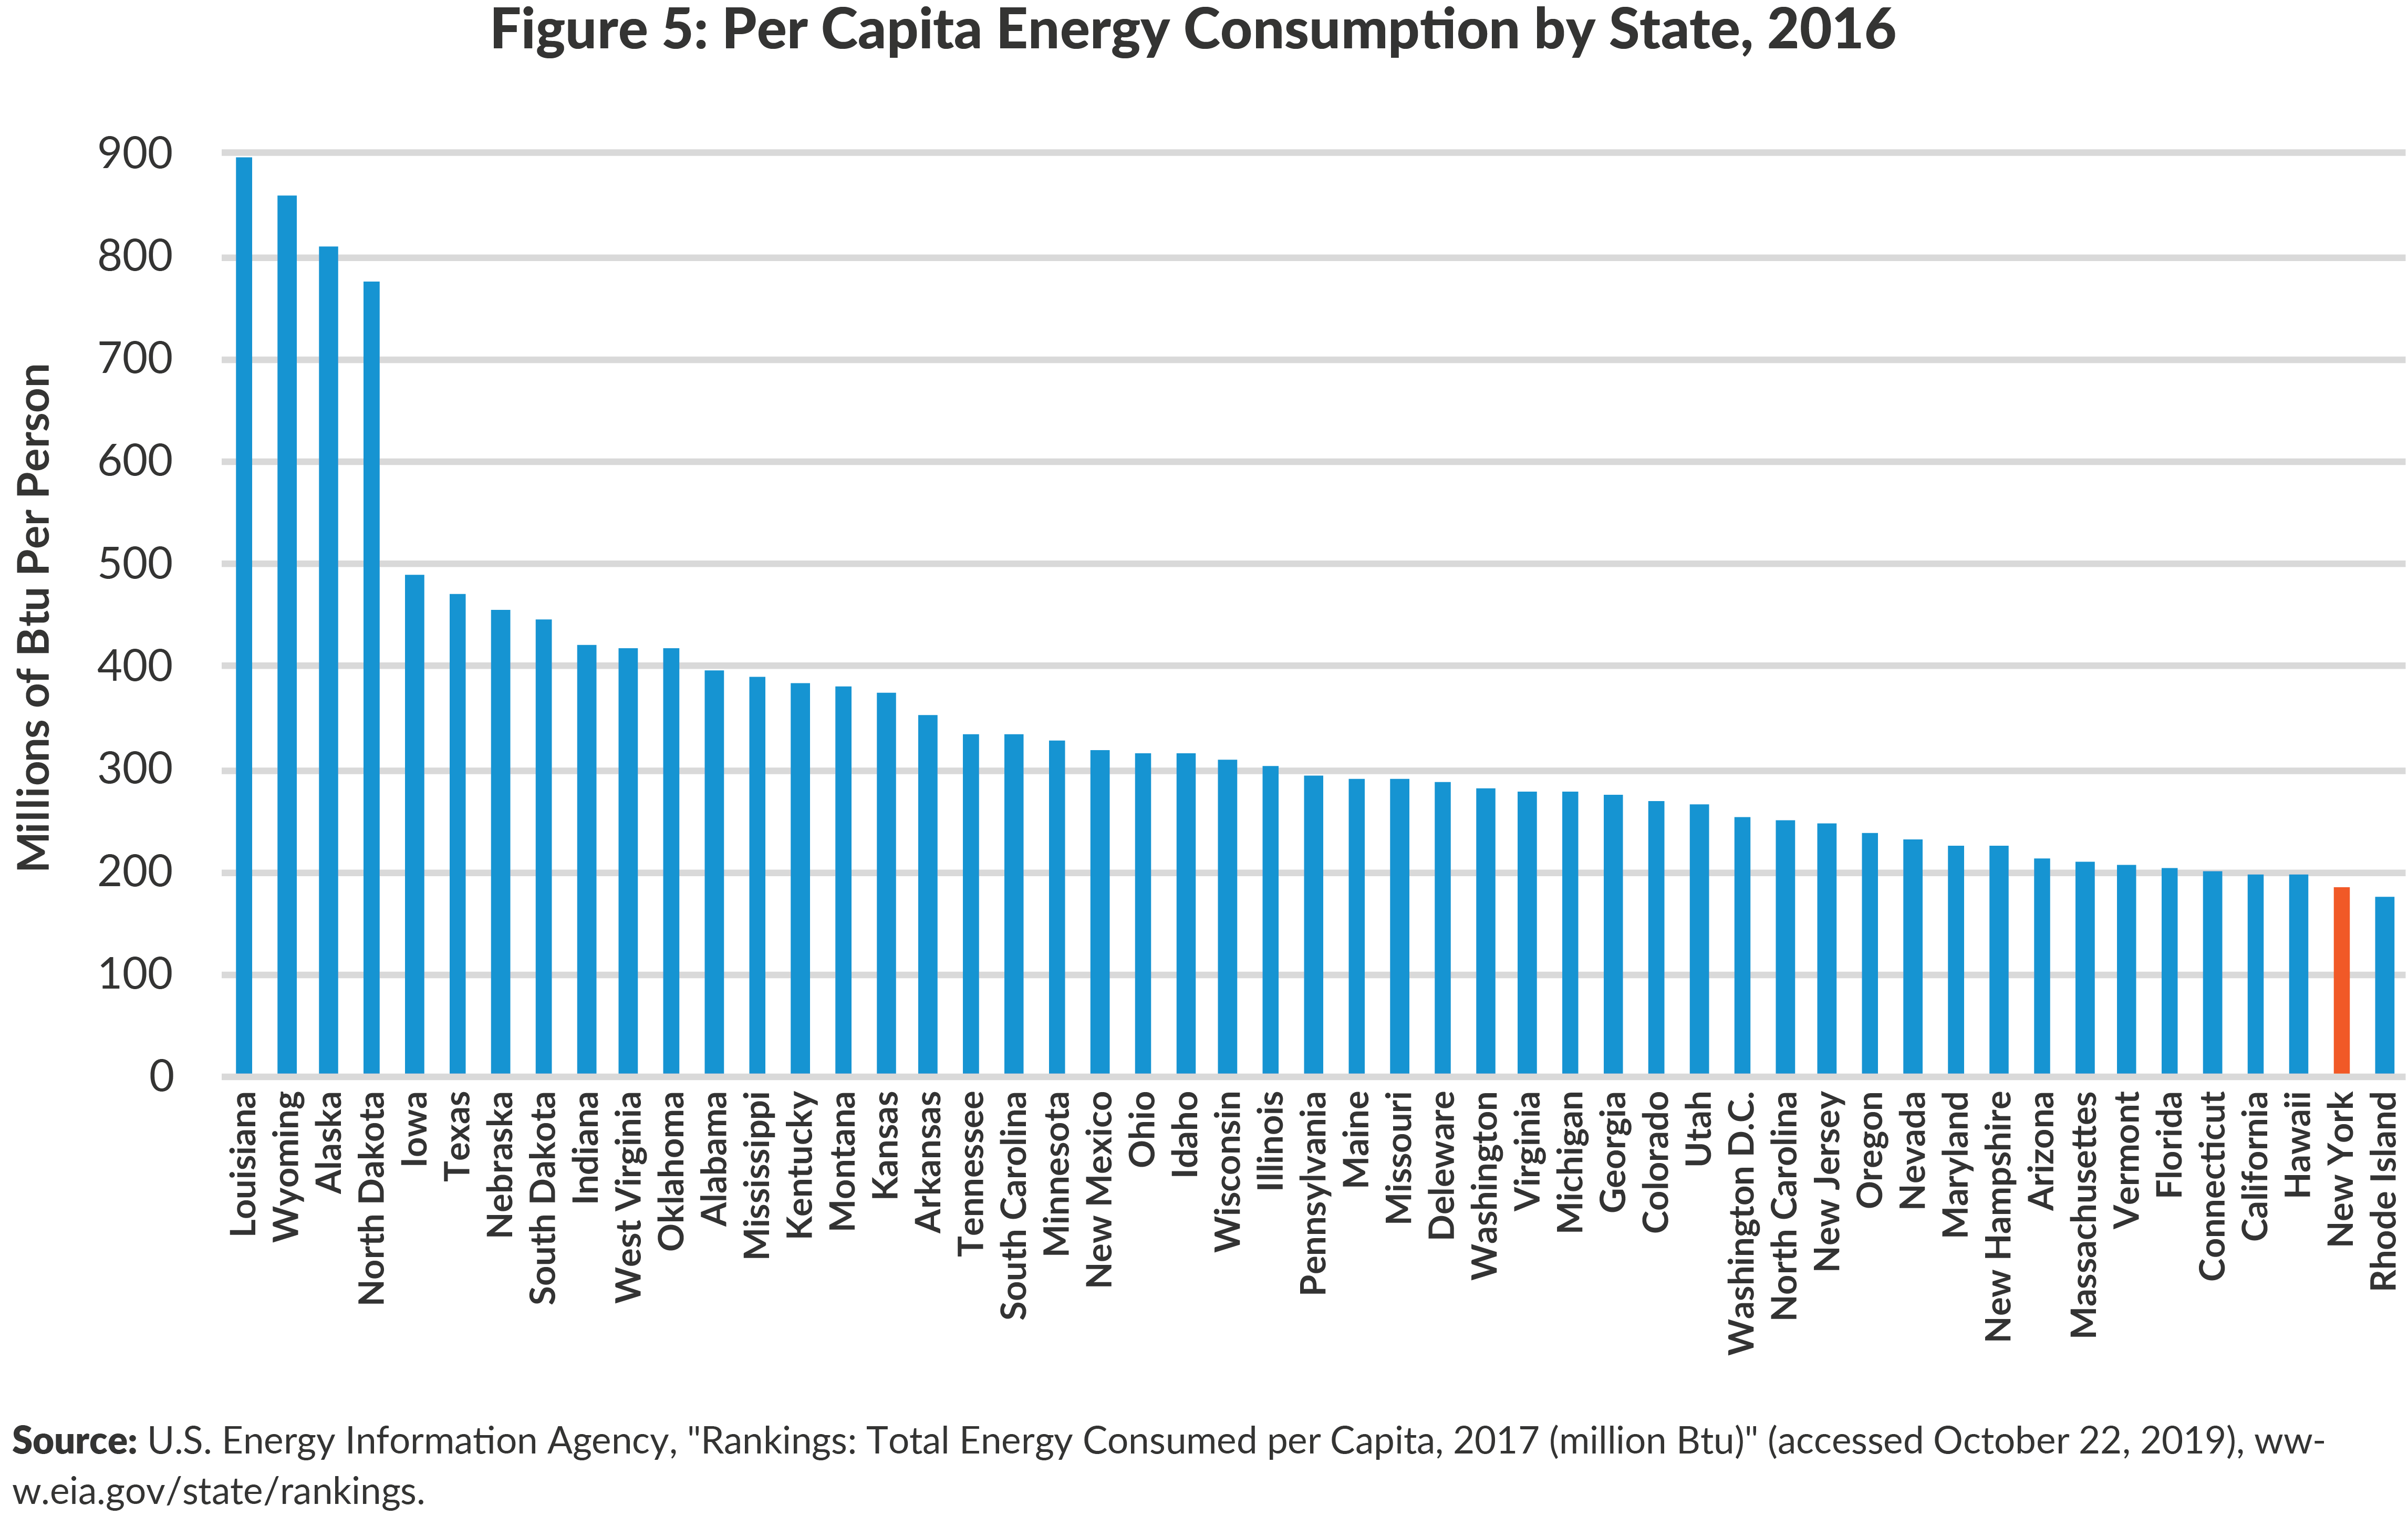 Figure 5: Per Capita Energy Consumption by State, 2016